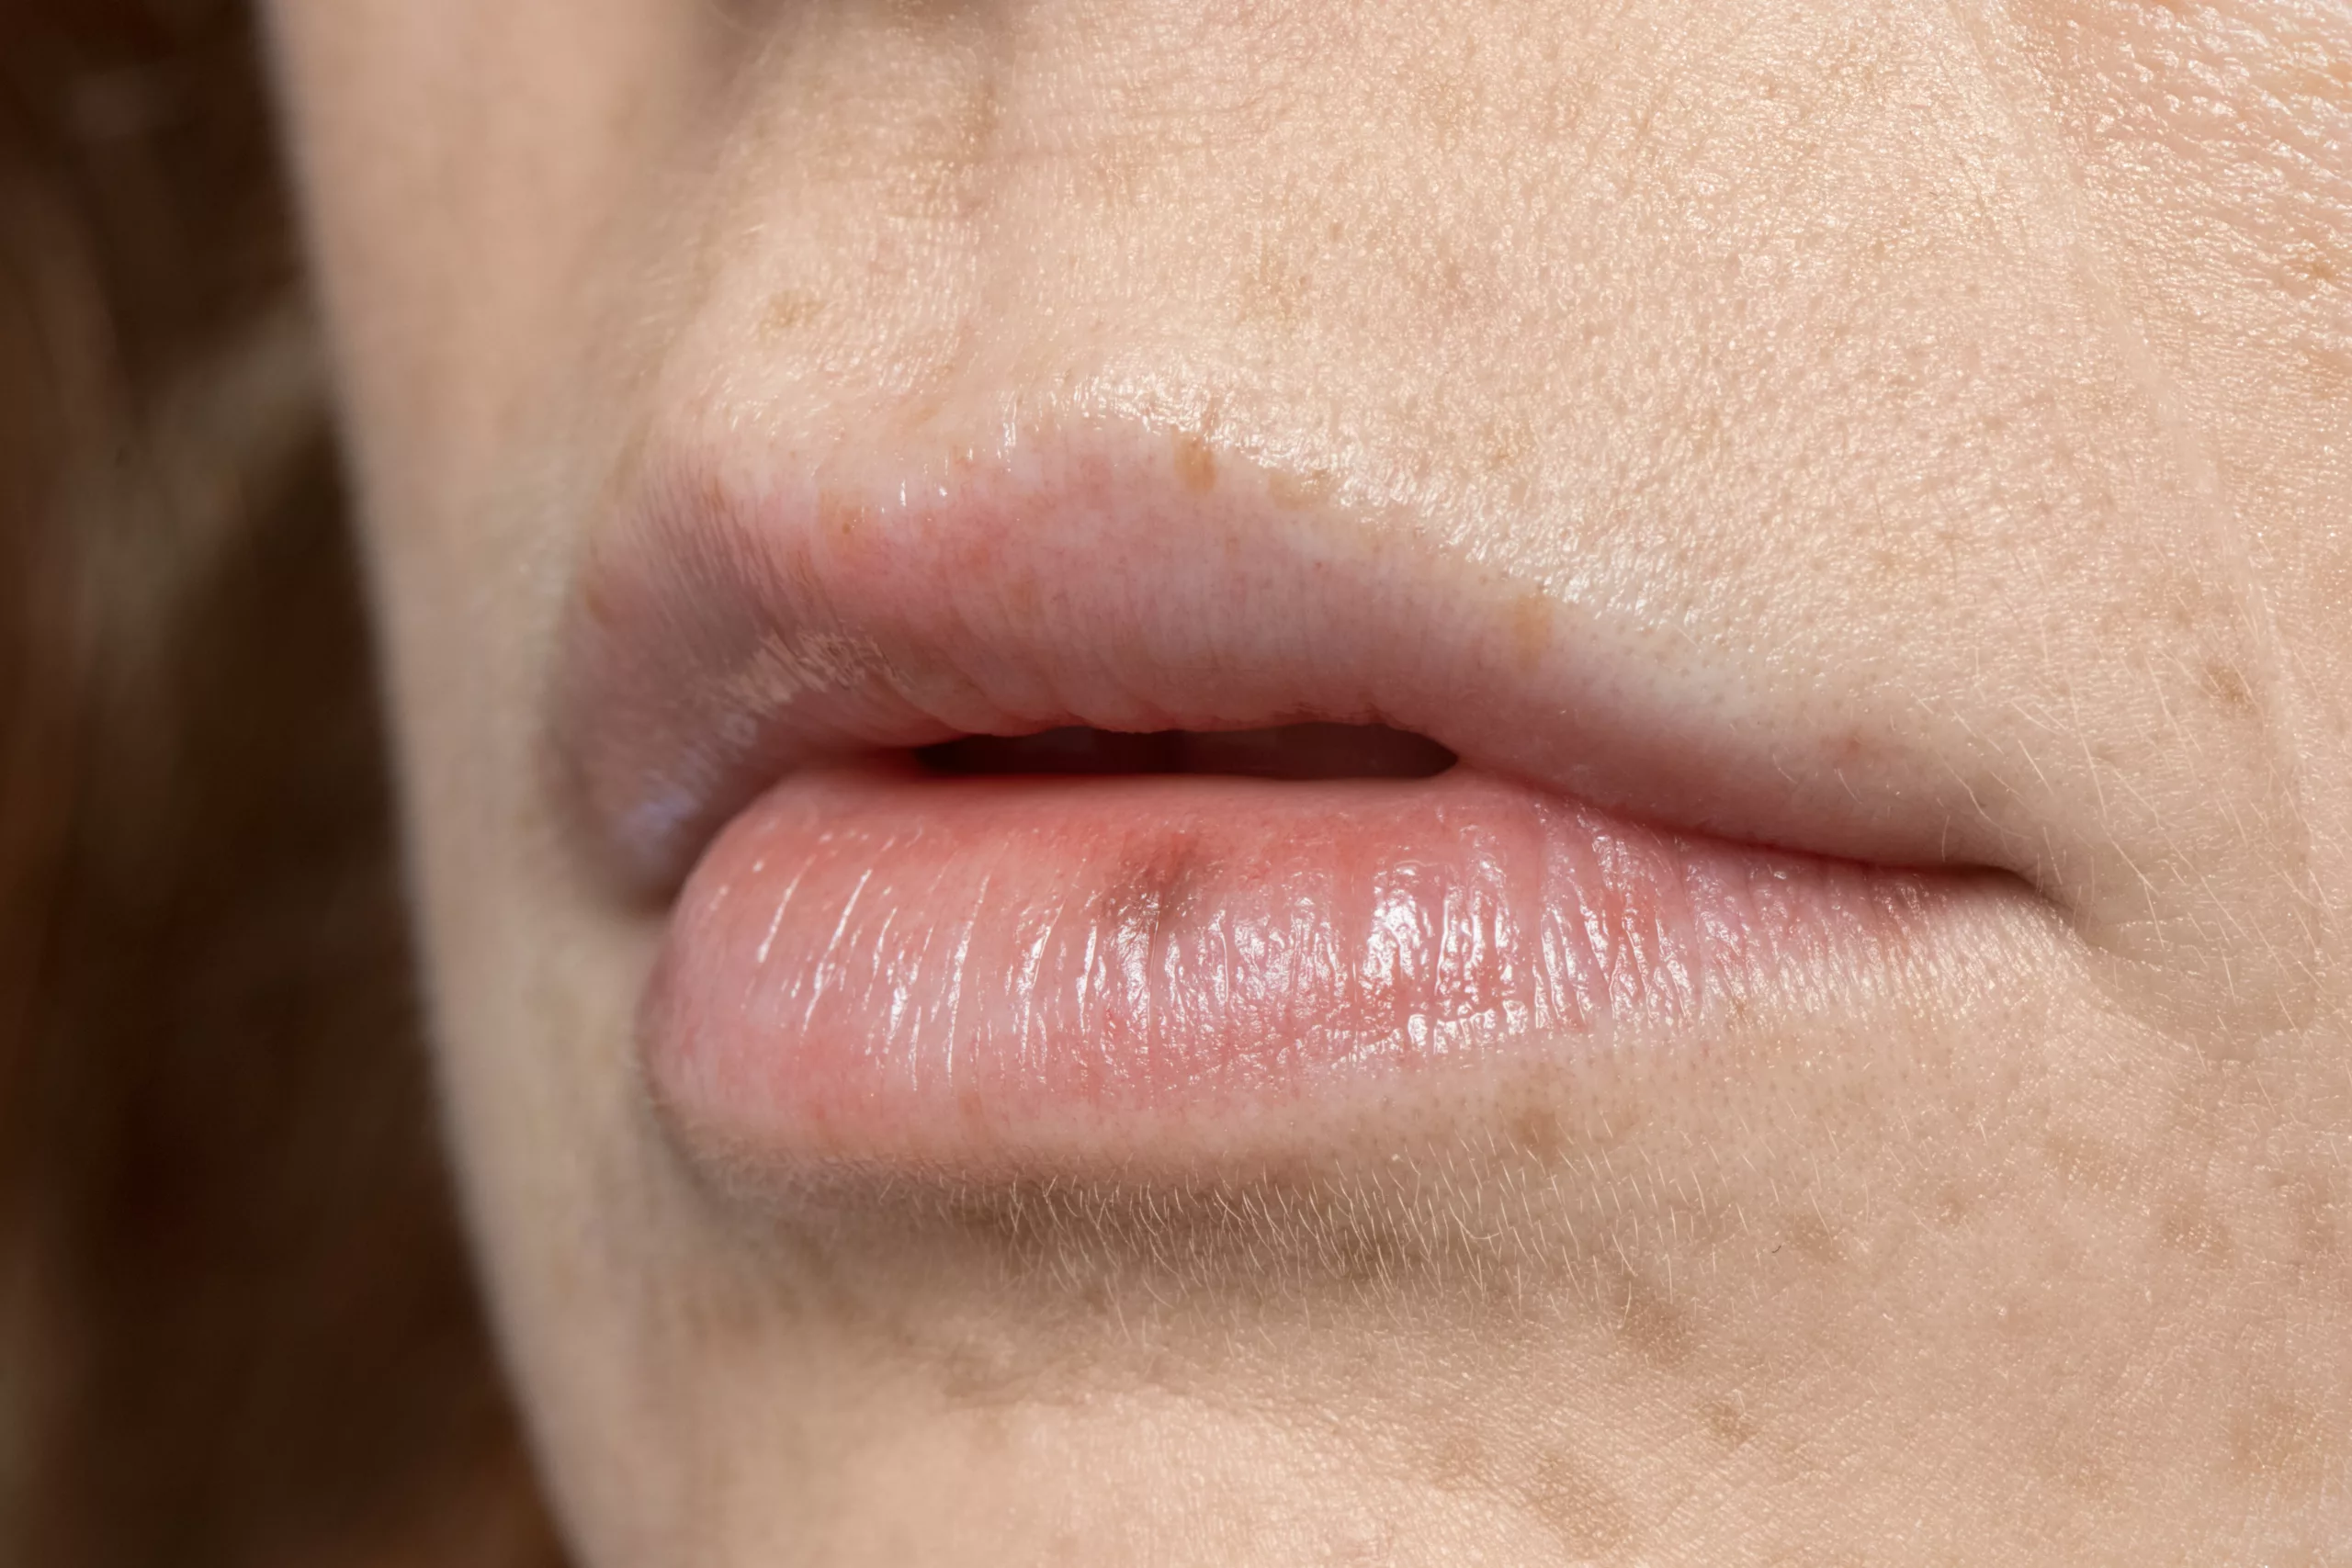 Sore Lip, which can be an early sign of lip cancer